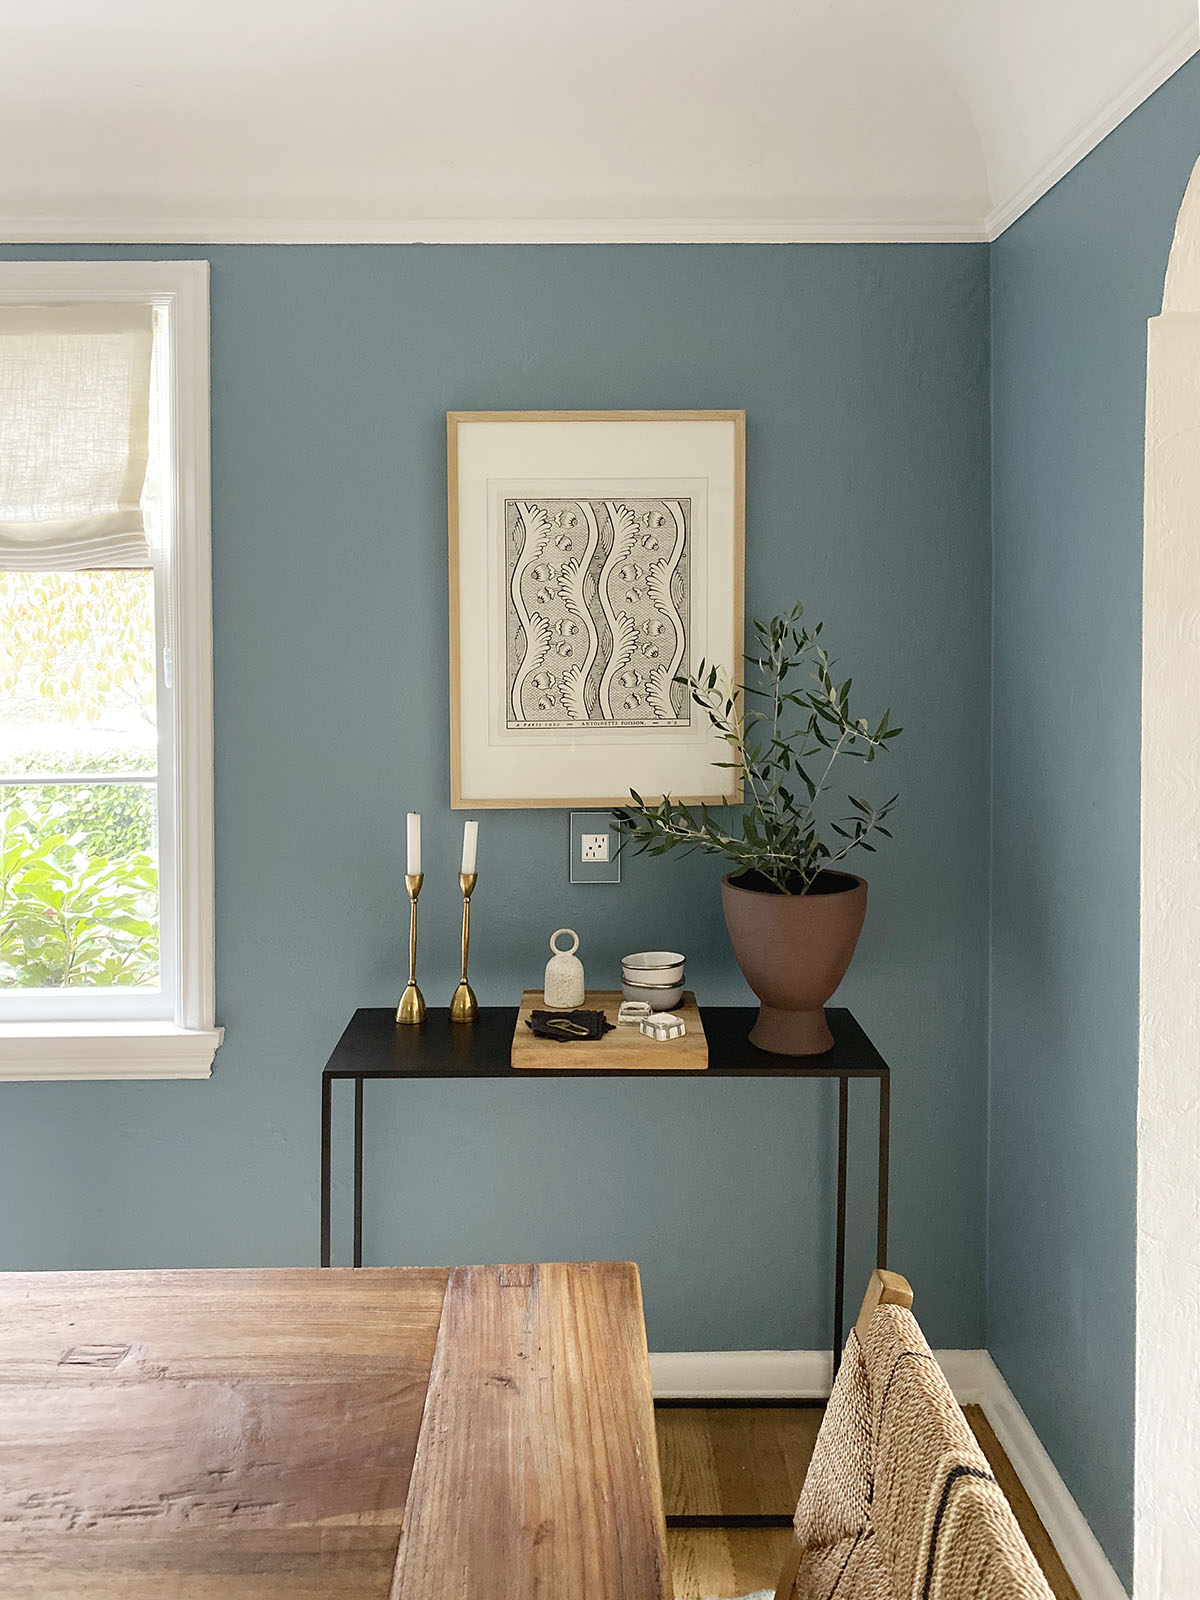 small vignette in dining room with art and console